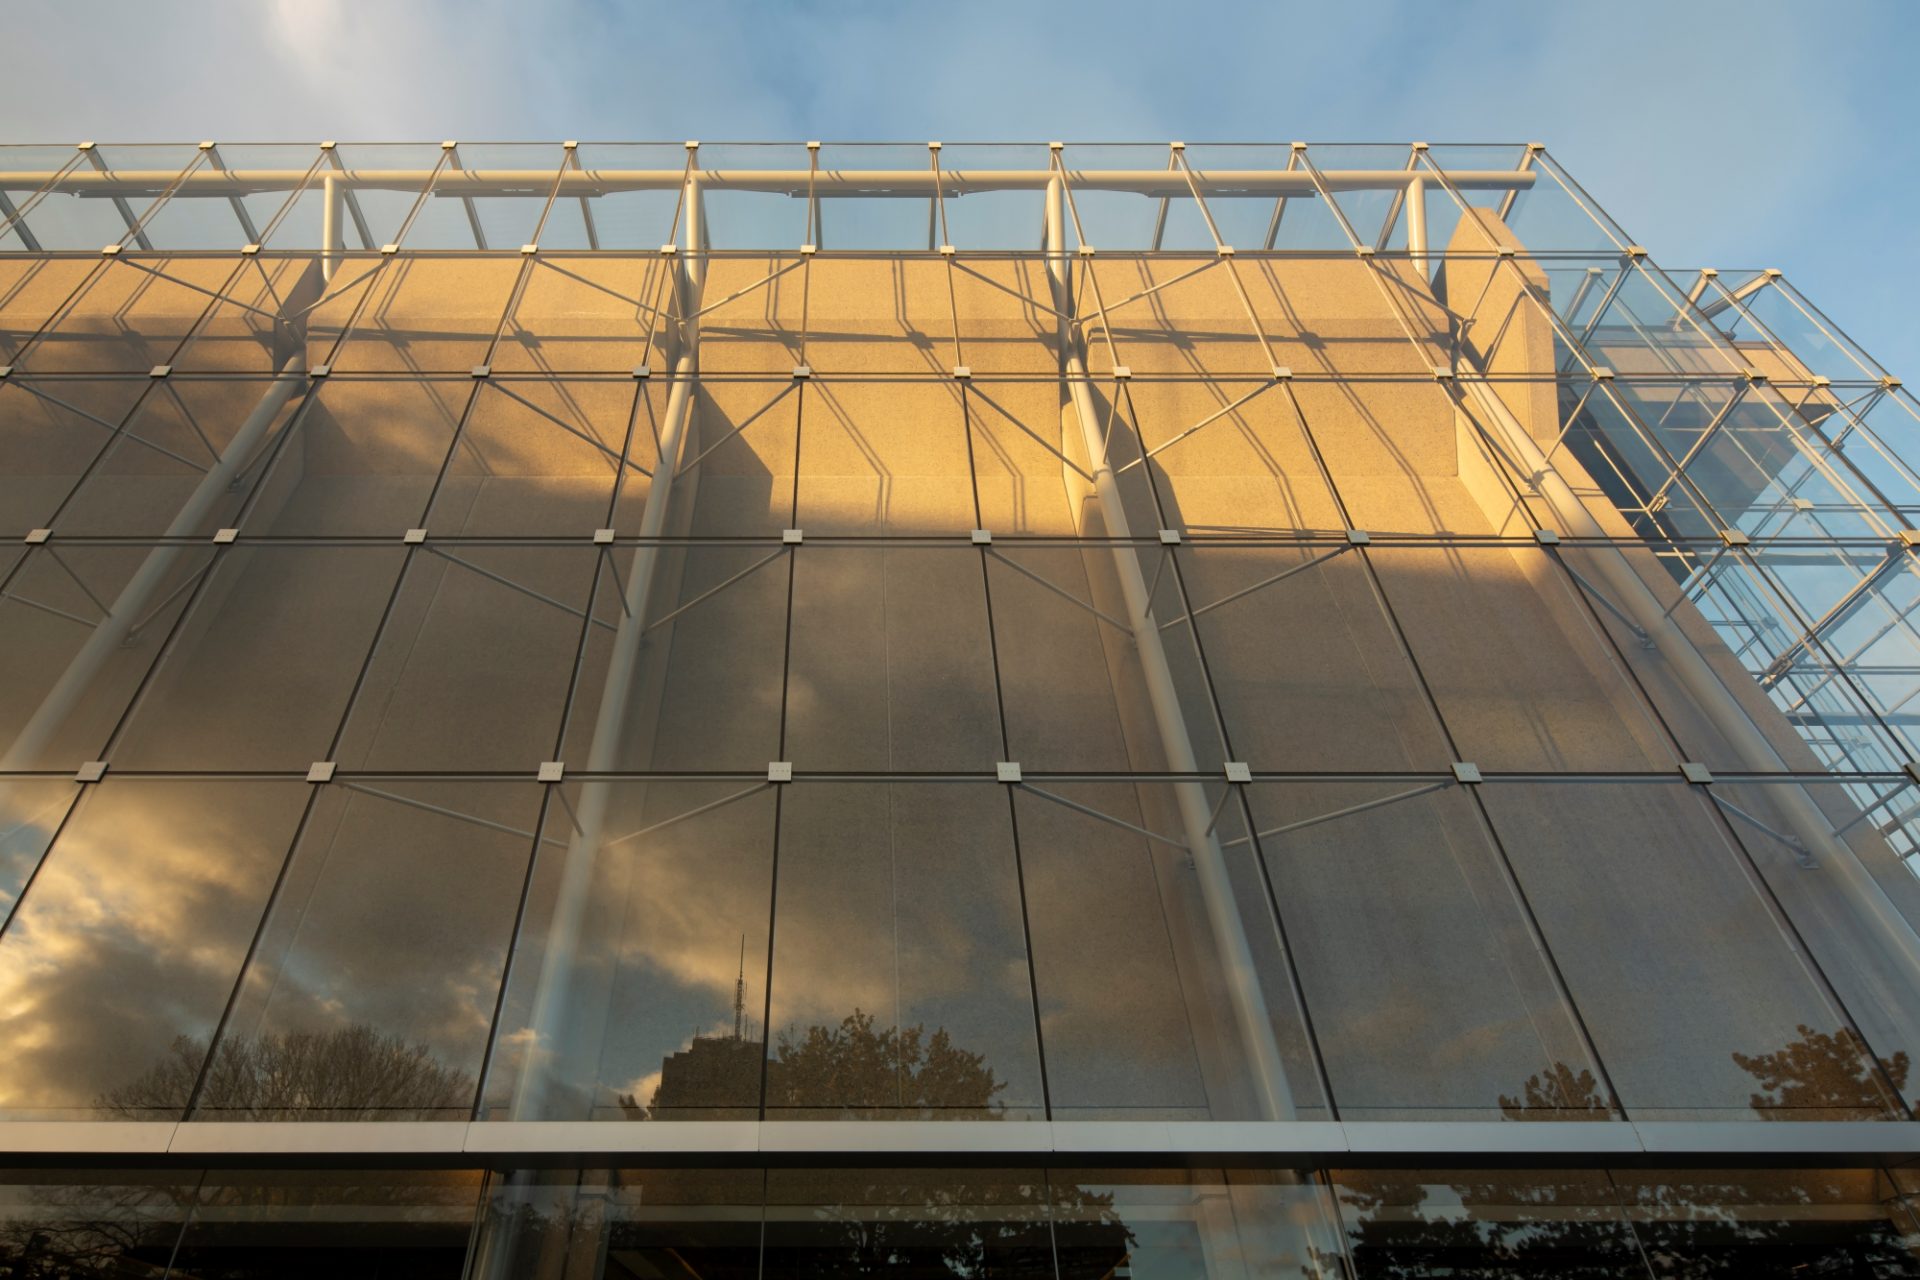 grand-theatre-quebec-lemay-atelier-21-architecture-conservation-credit-stephanegroleau-glass-wall-06